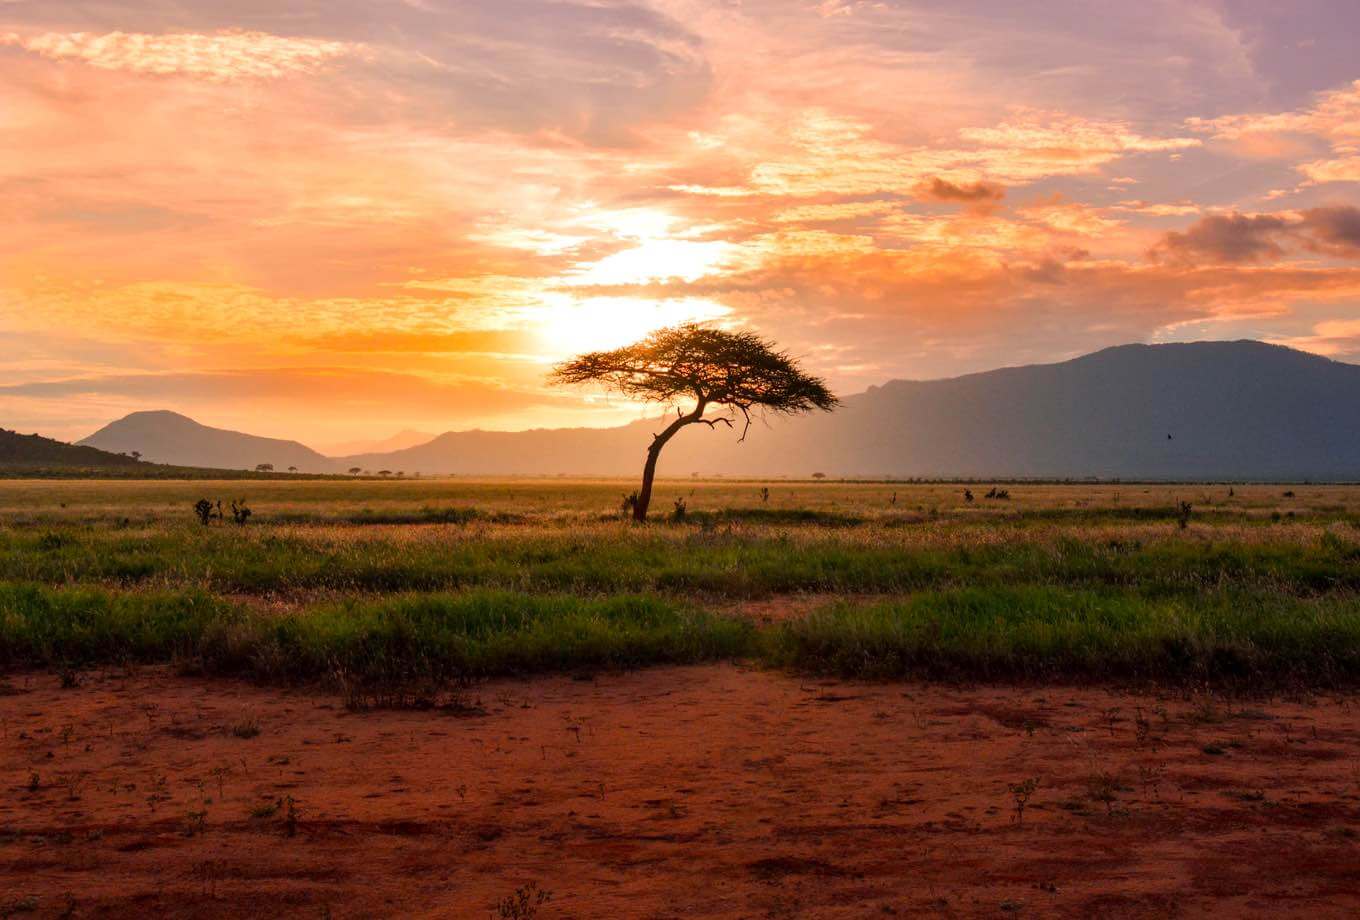 Sunset hitting an African tree in the middle of a deserted field